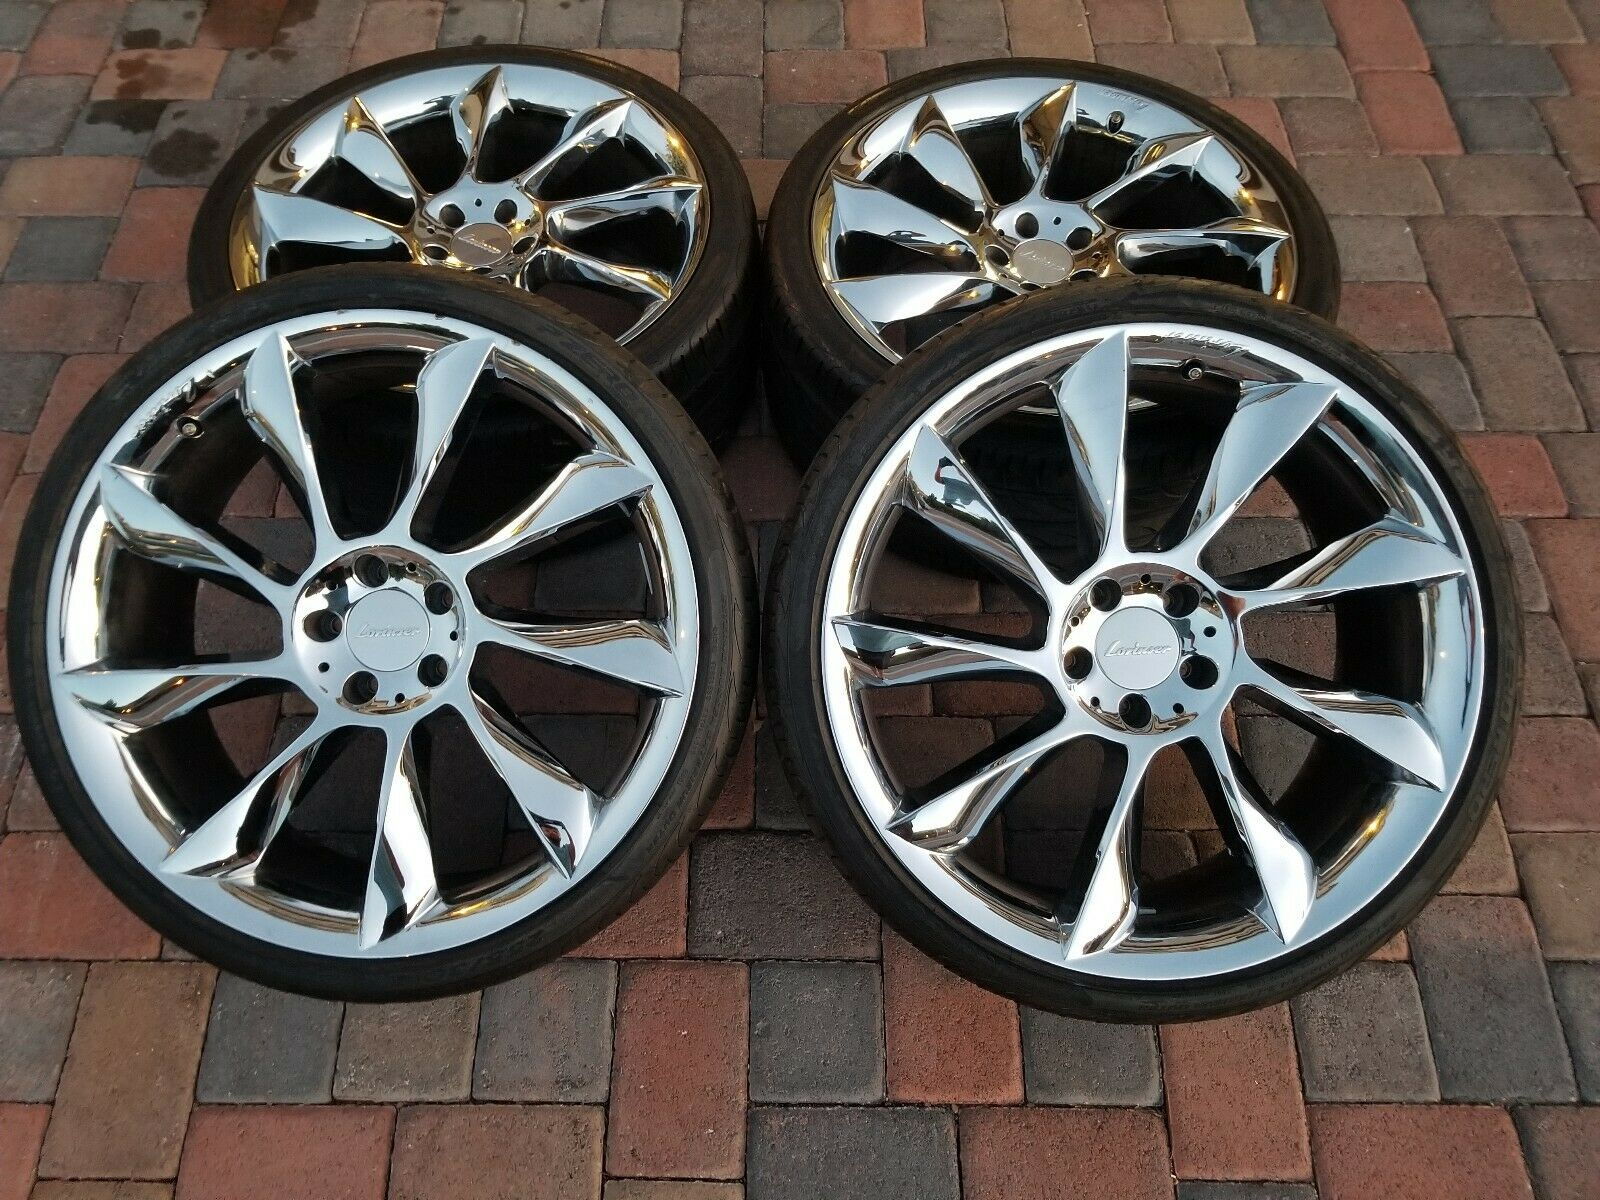 Wheels and Tires/Axles - RARE 21" MERCEDES BENZ LORINSER RS8 WHEELS RIMS TIRES CHROME - Used - Las Vegas, NV 89139, United States